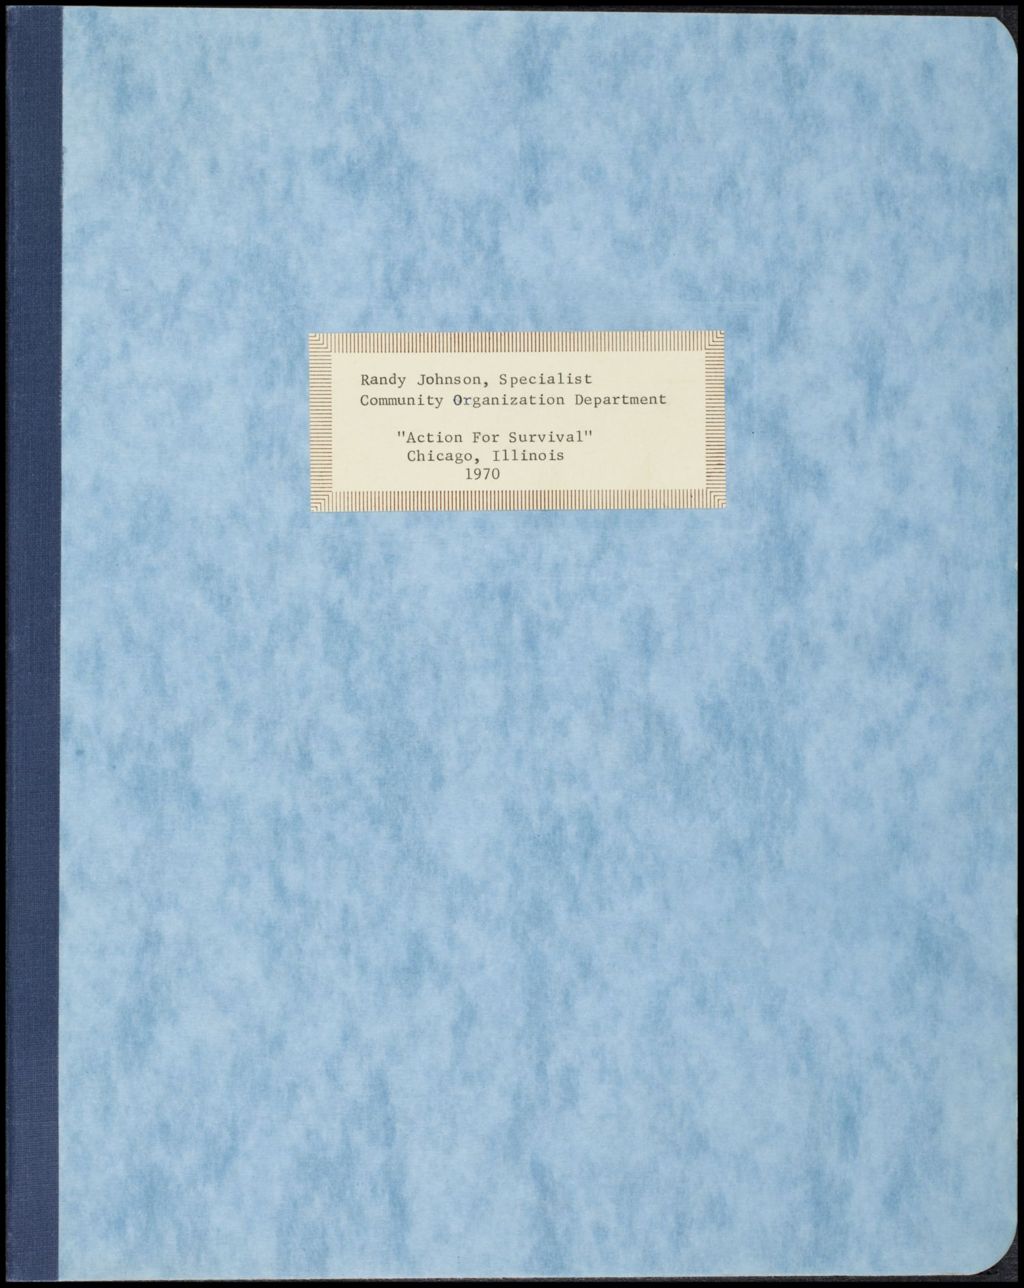 Crime in the Community Must Go Position Paper, 1970 (Folder III-1871)